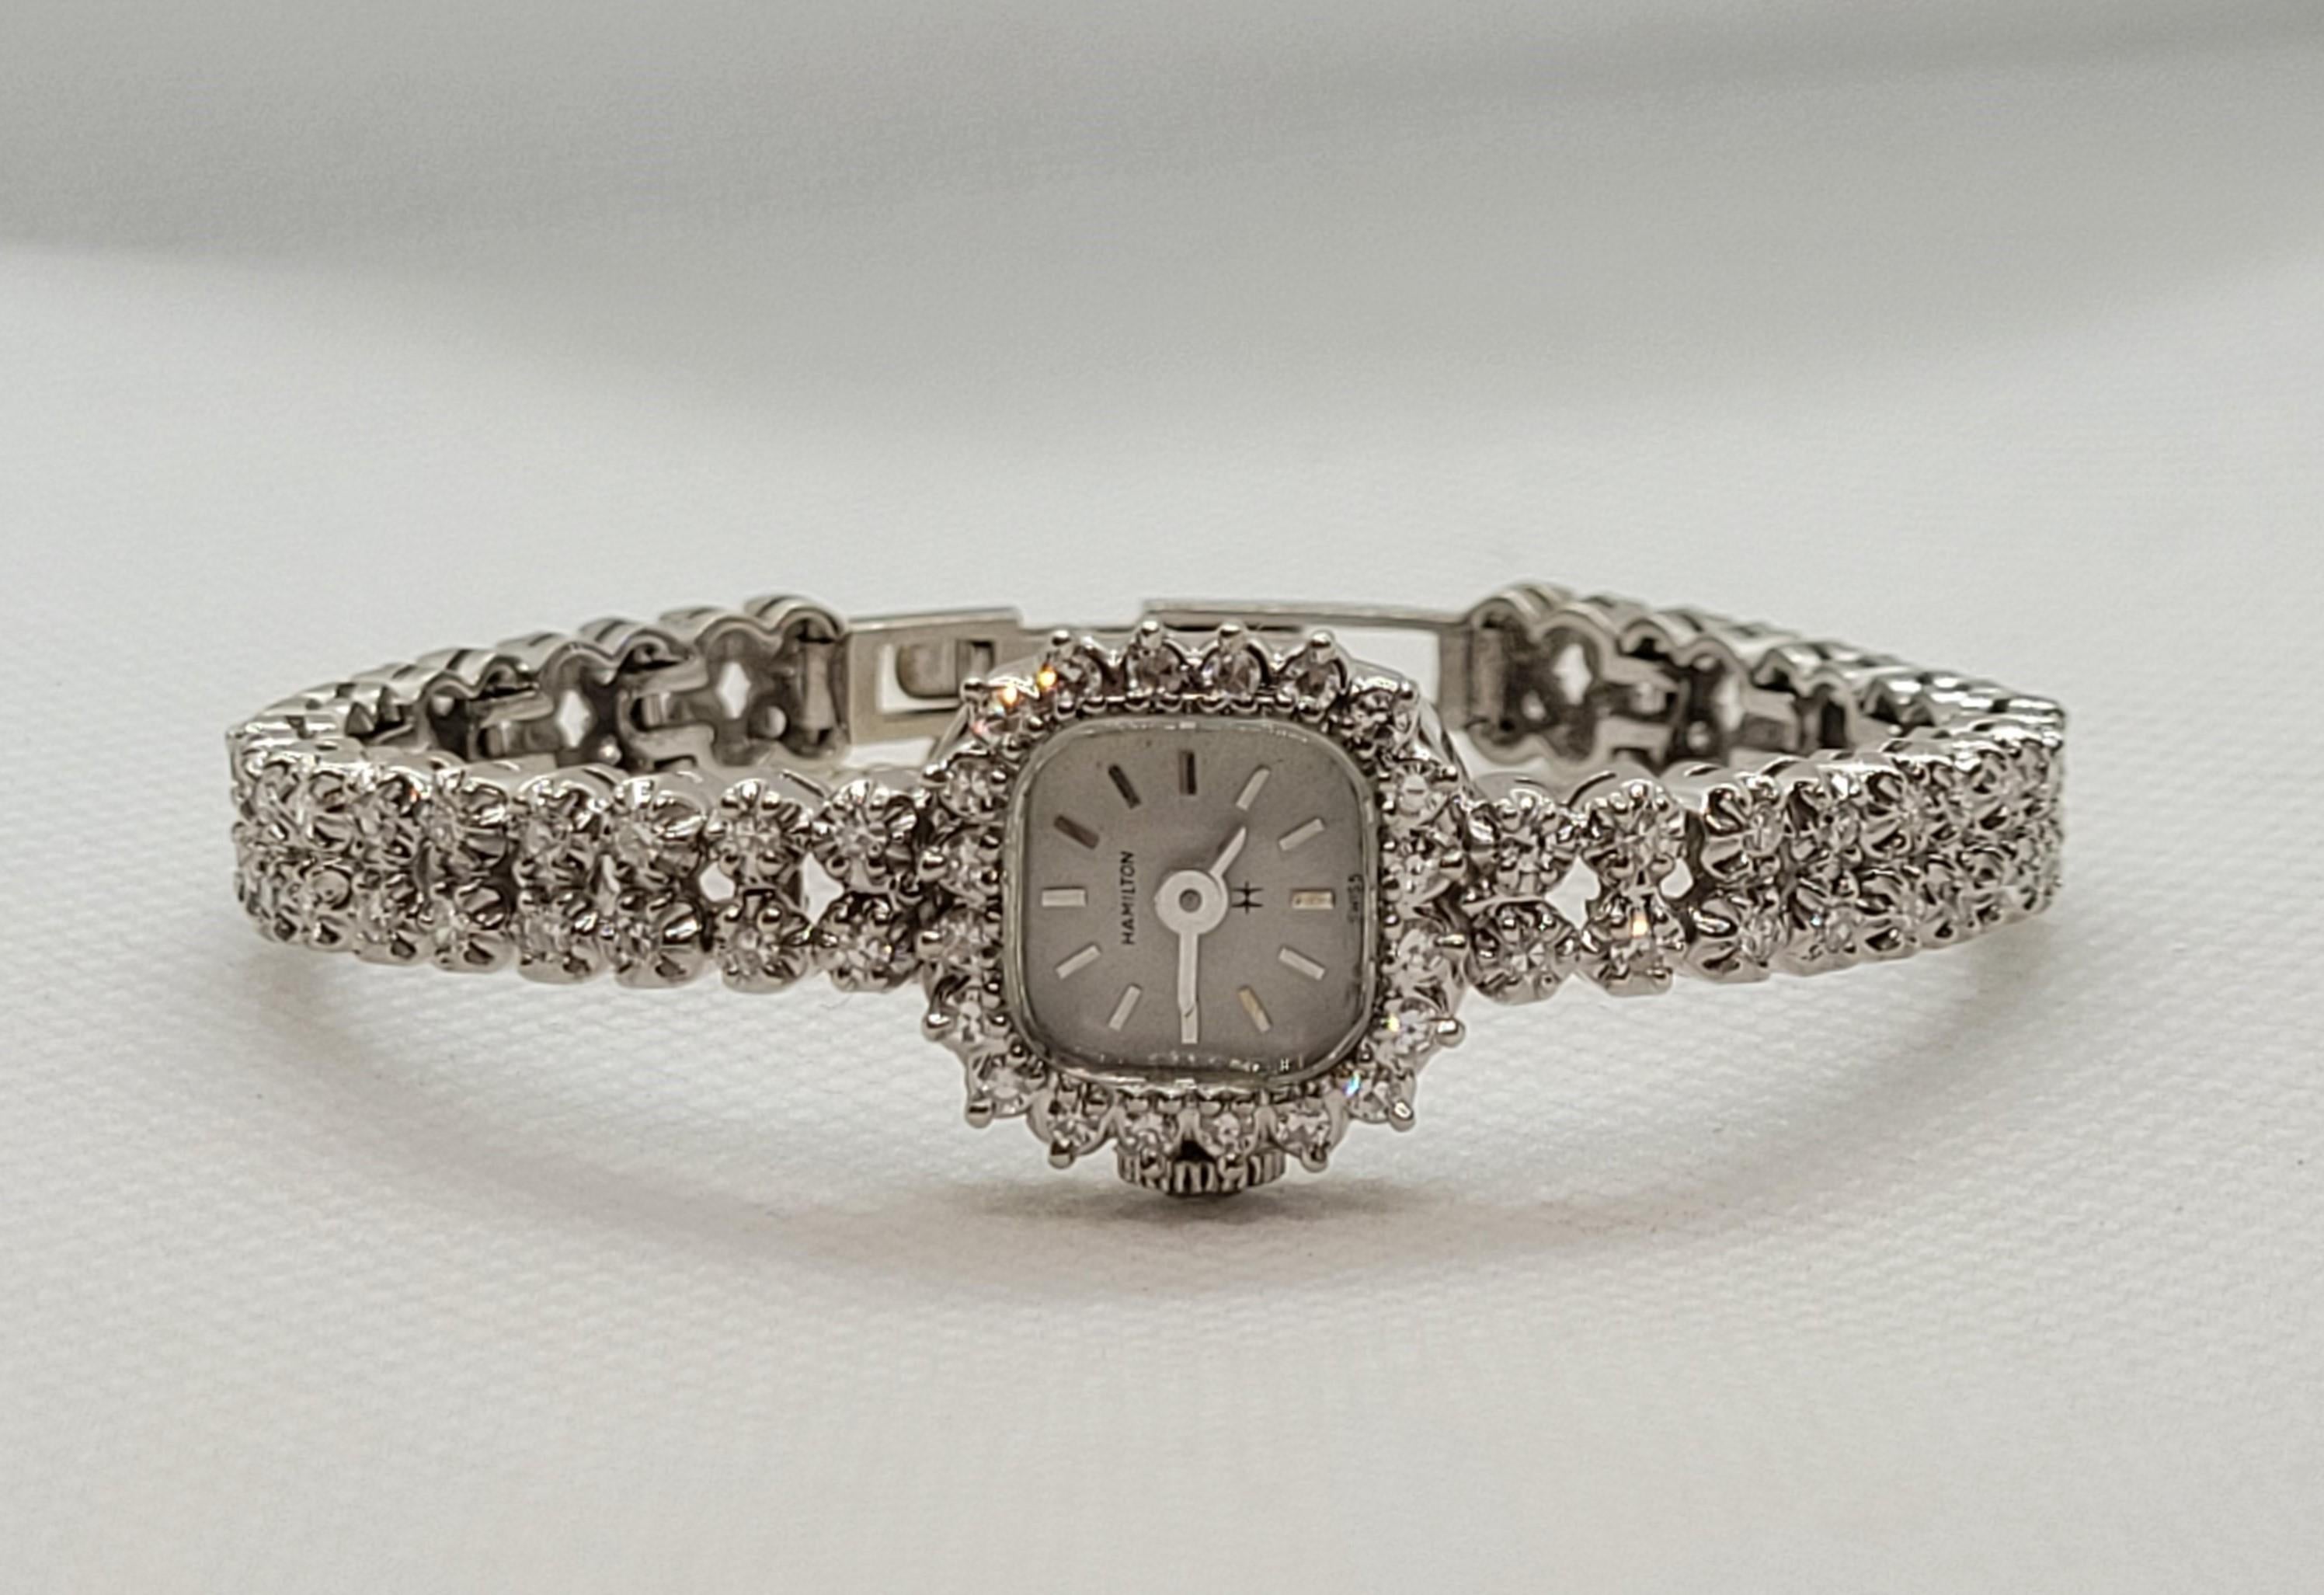 Ladies 14kt white gold diamond Hamilton watch with 56 diamonds of approximately 1.00cttw that are G in color and VS/SI in clarity. The watch has been serviced by our watchmaker, has a quartz movement, and comes with a 90-day warranty. The rounded